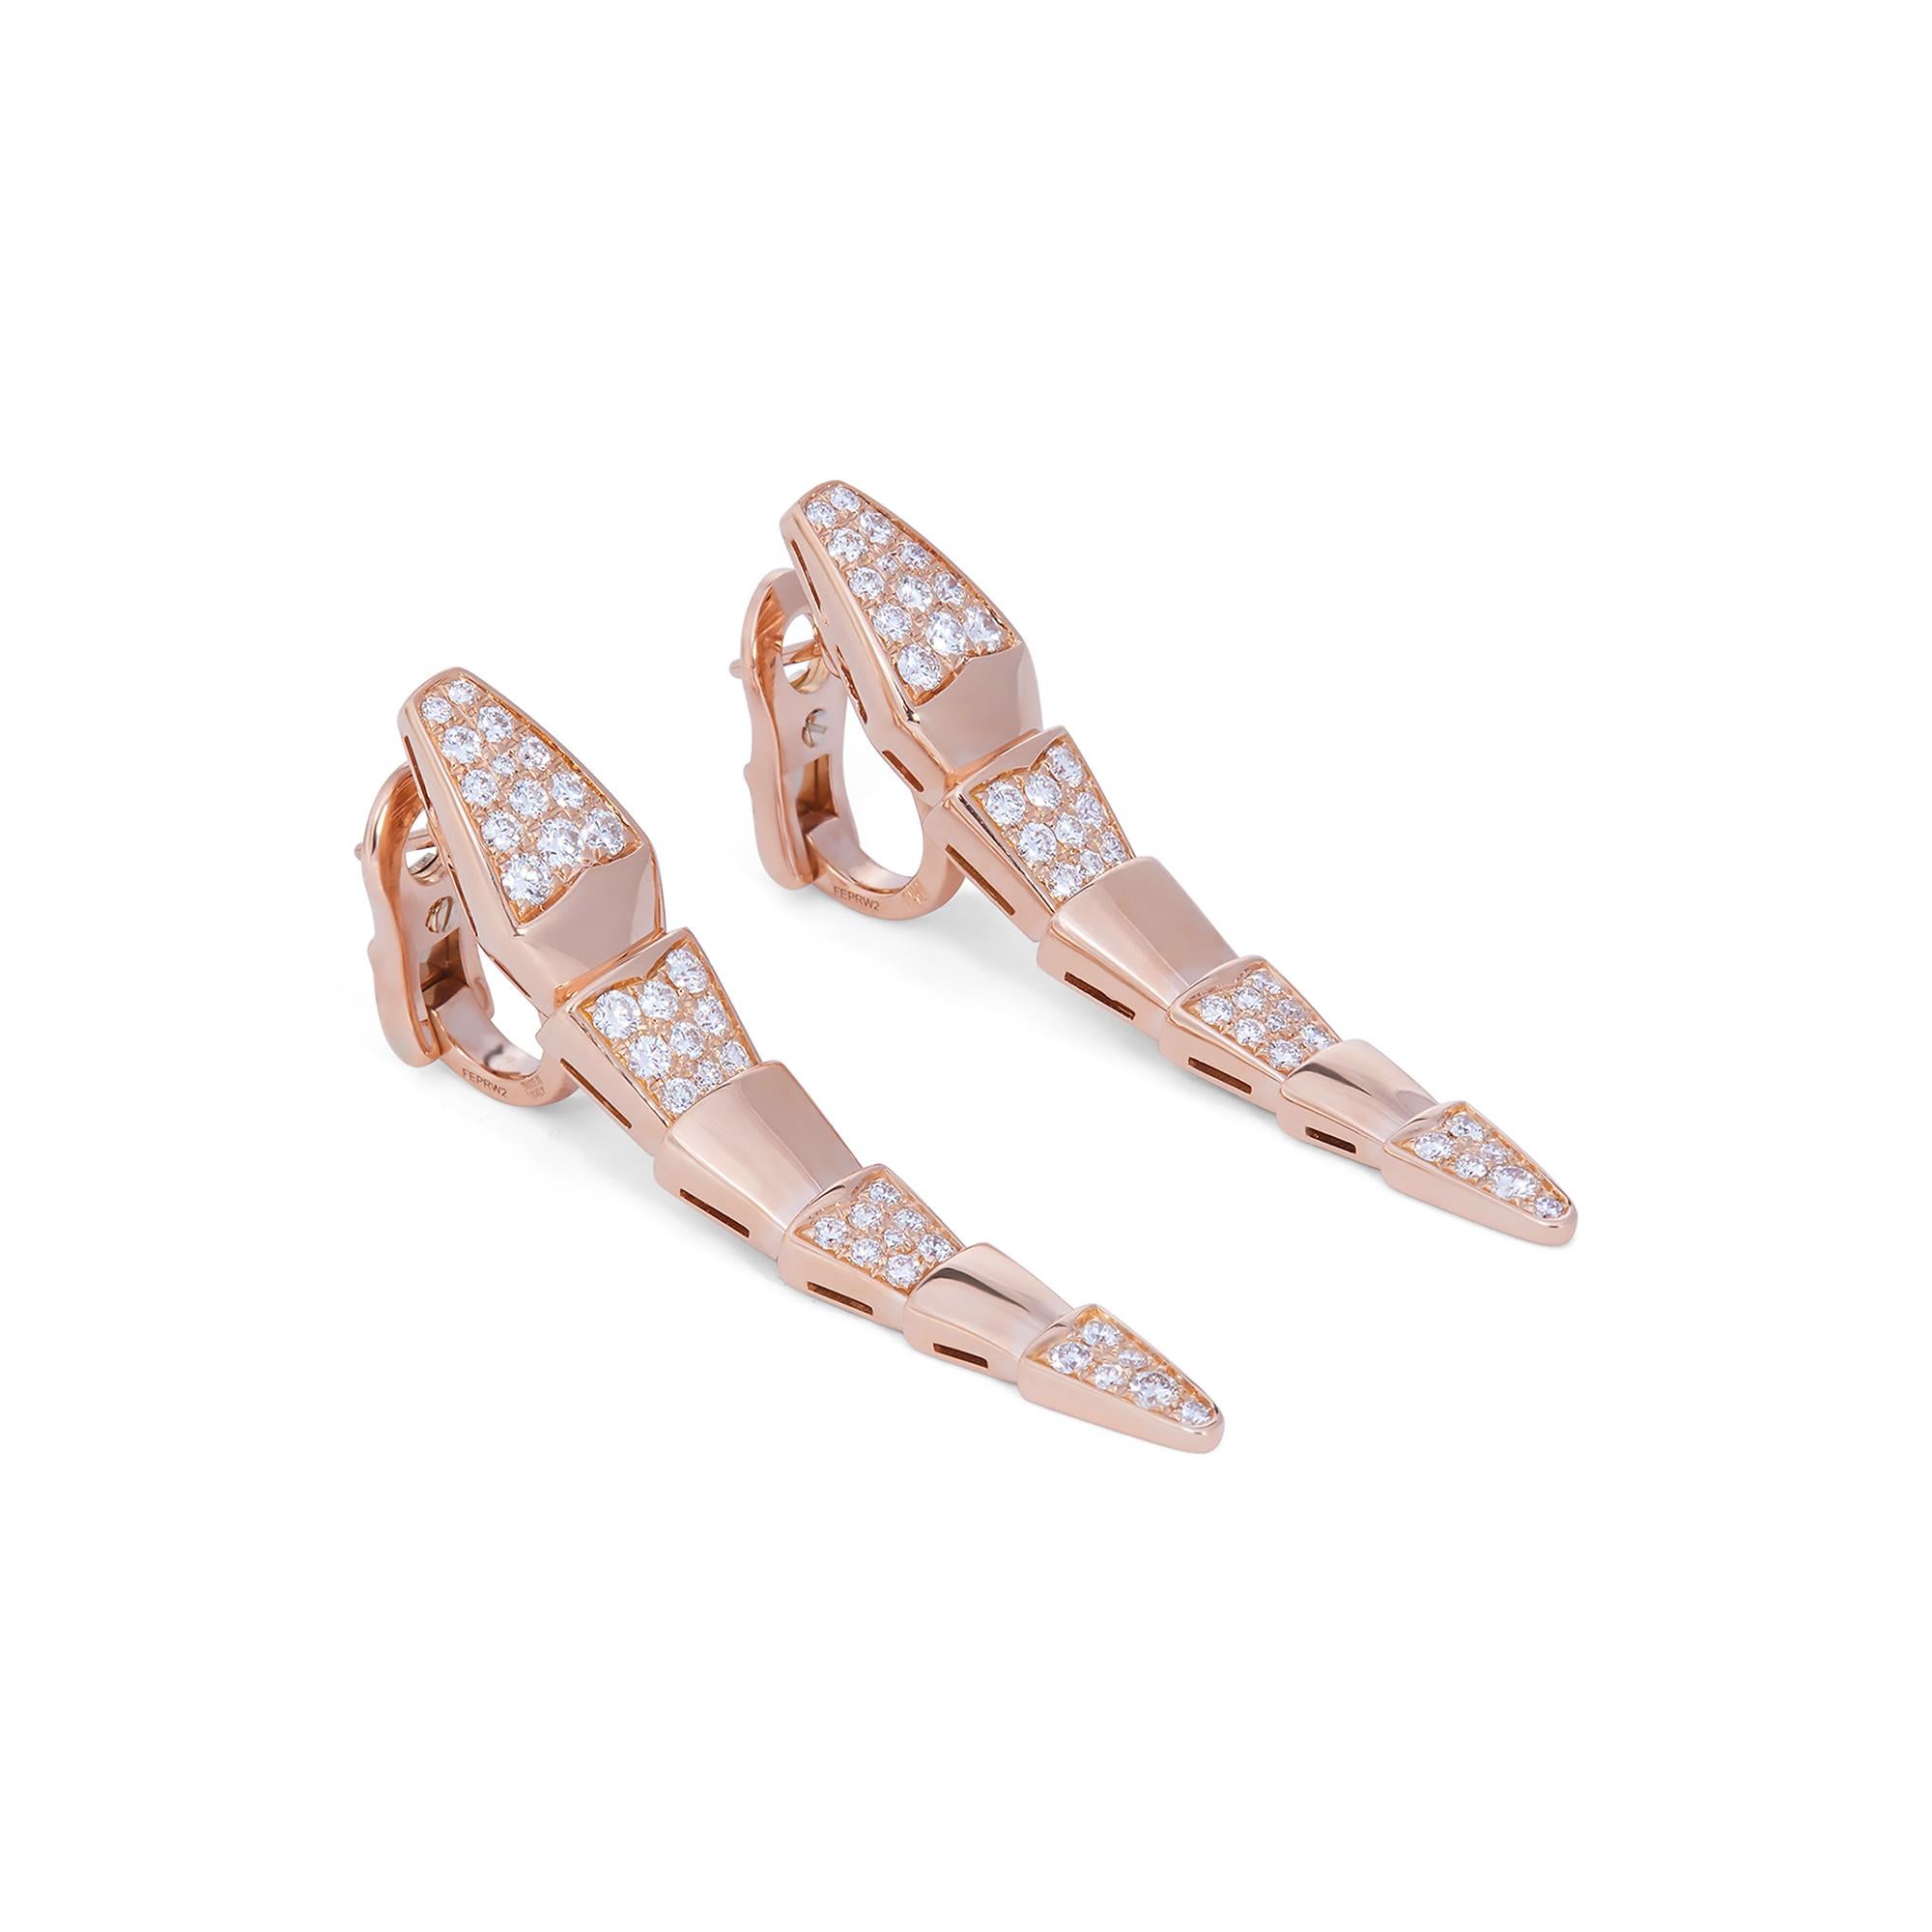 Authentic Bvlgari Serpenti Viper earrings crafted in 18 karat rose gold and featuring stacked geometric links resembling a snake's scales.  The alternating links and snake heads are set with approximately 1.33 carats of round brilliant cut diamonds.